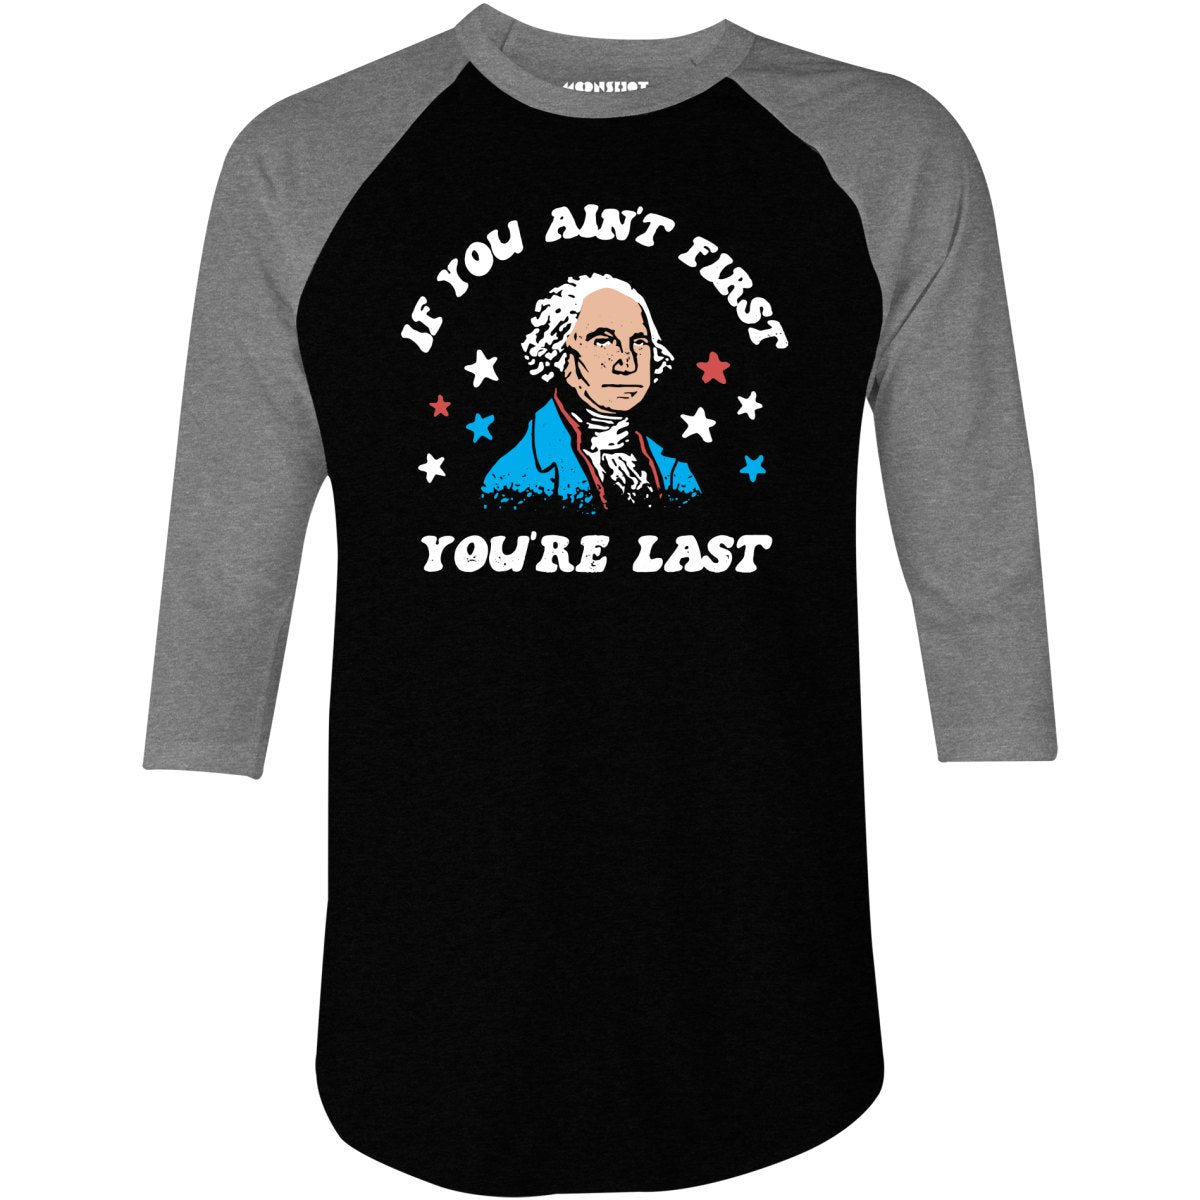 If You Ain't First You're Last - 3/4 Sleeve Raglan T-Shirt